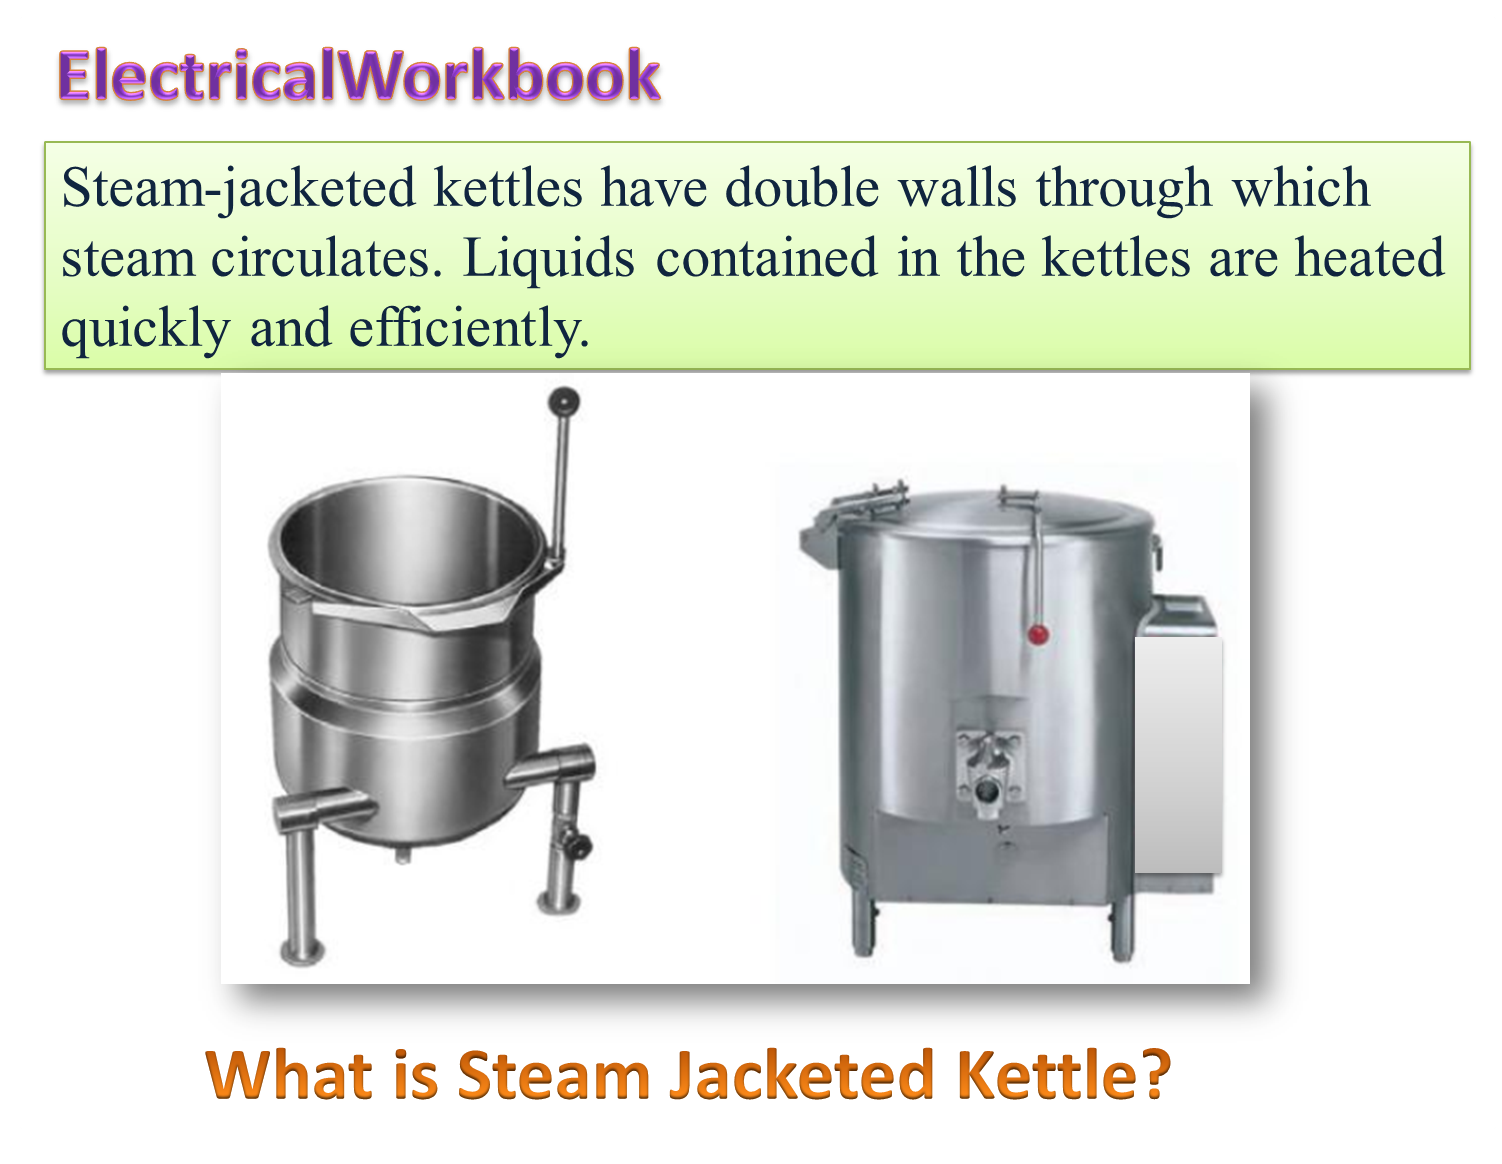 What is Steam Jacketed Kettle